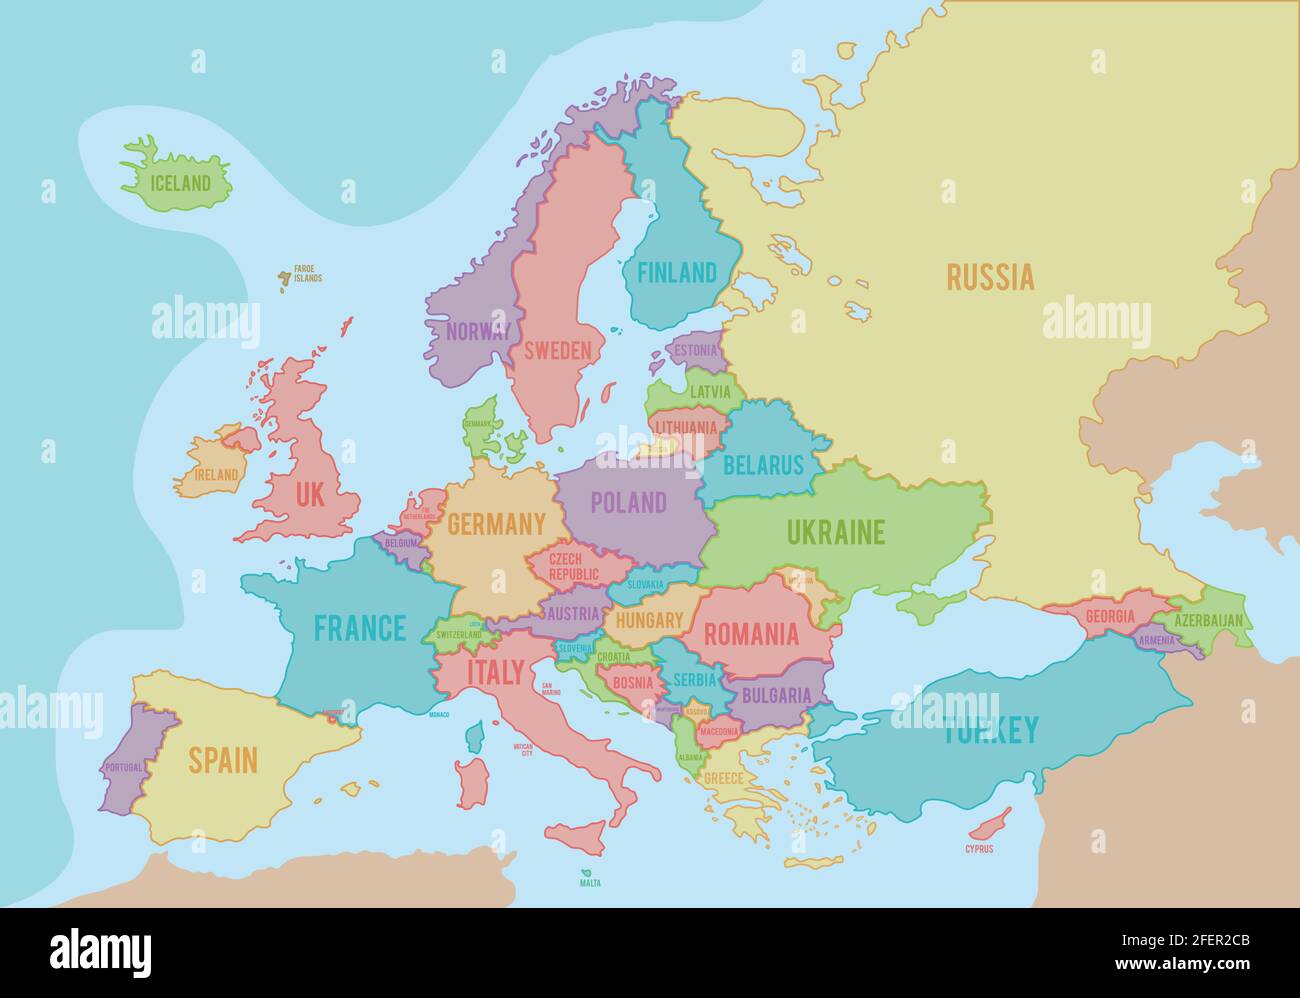 Political map of Europe with colors and borders for each country and names in English. Vector illustration. Stock Vector